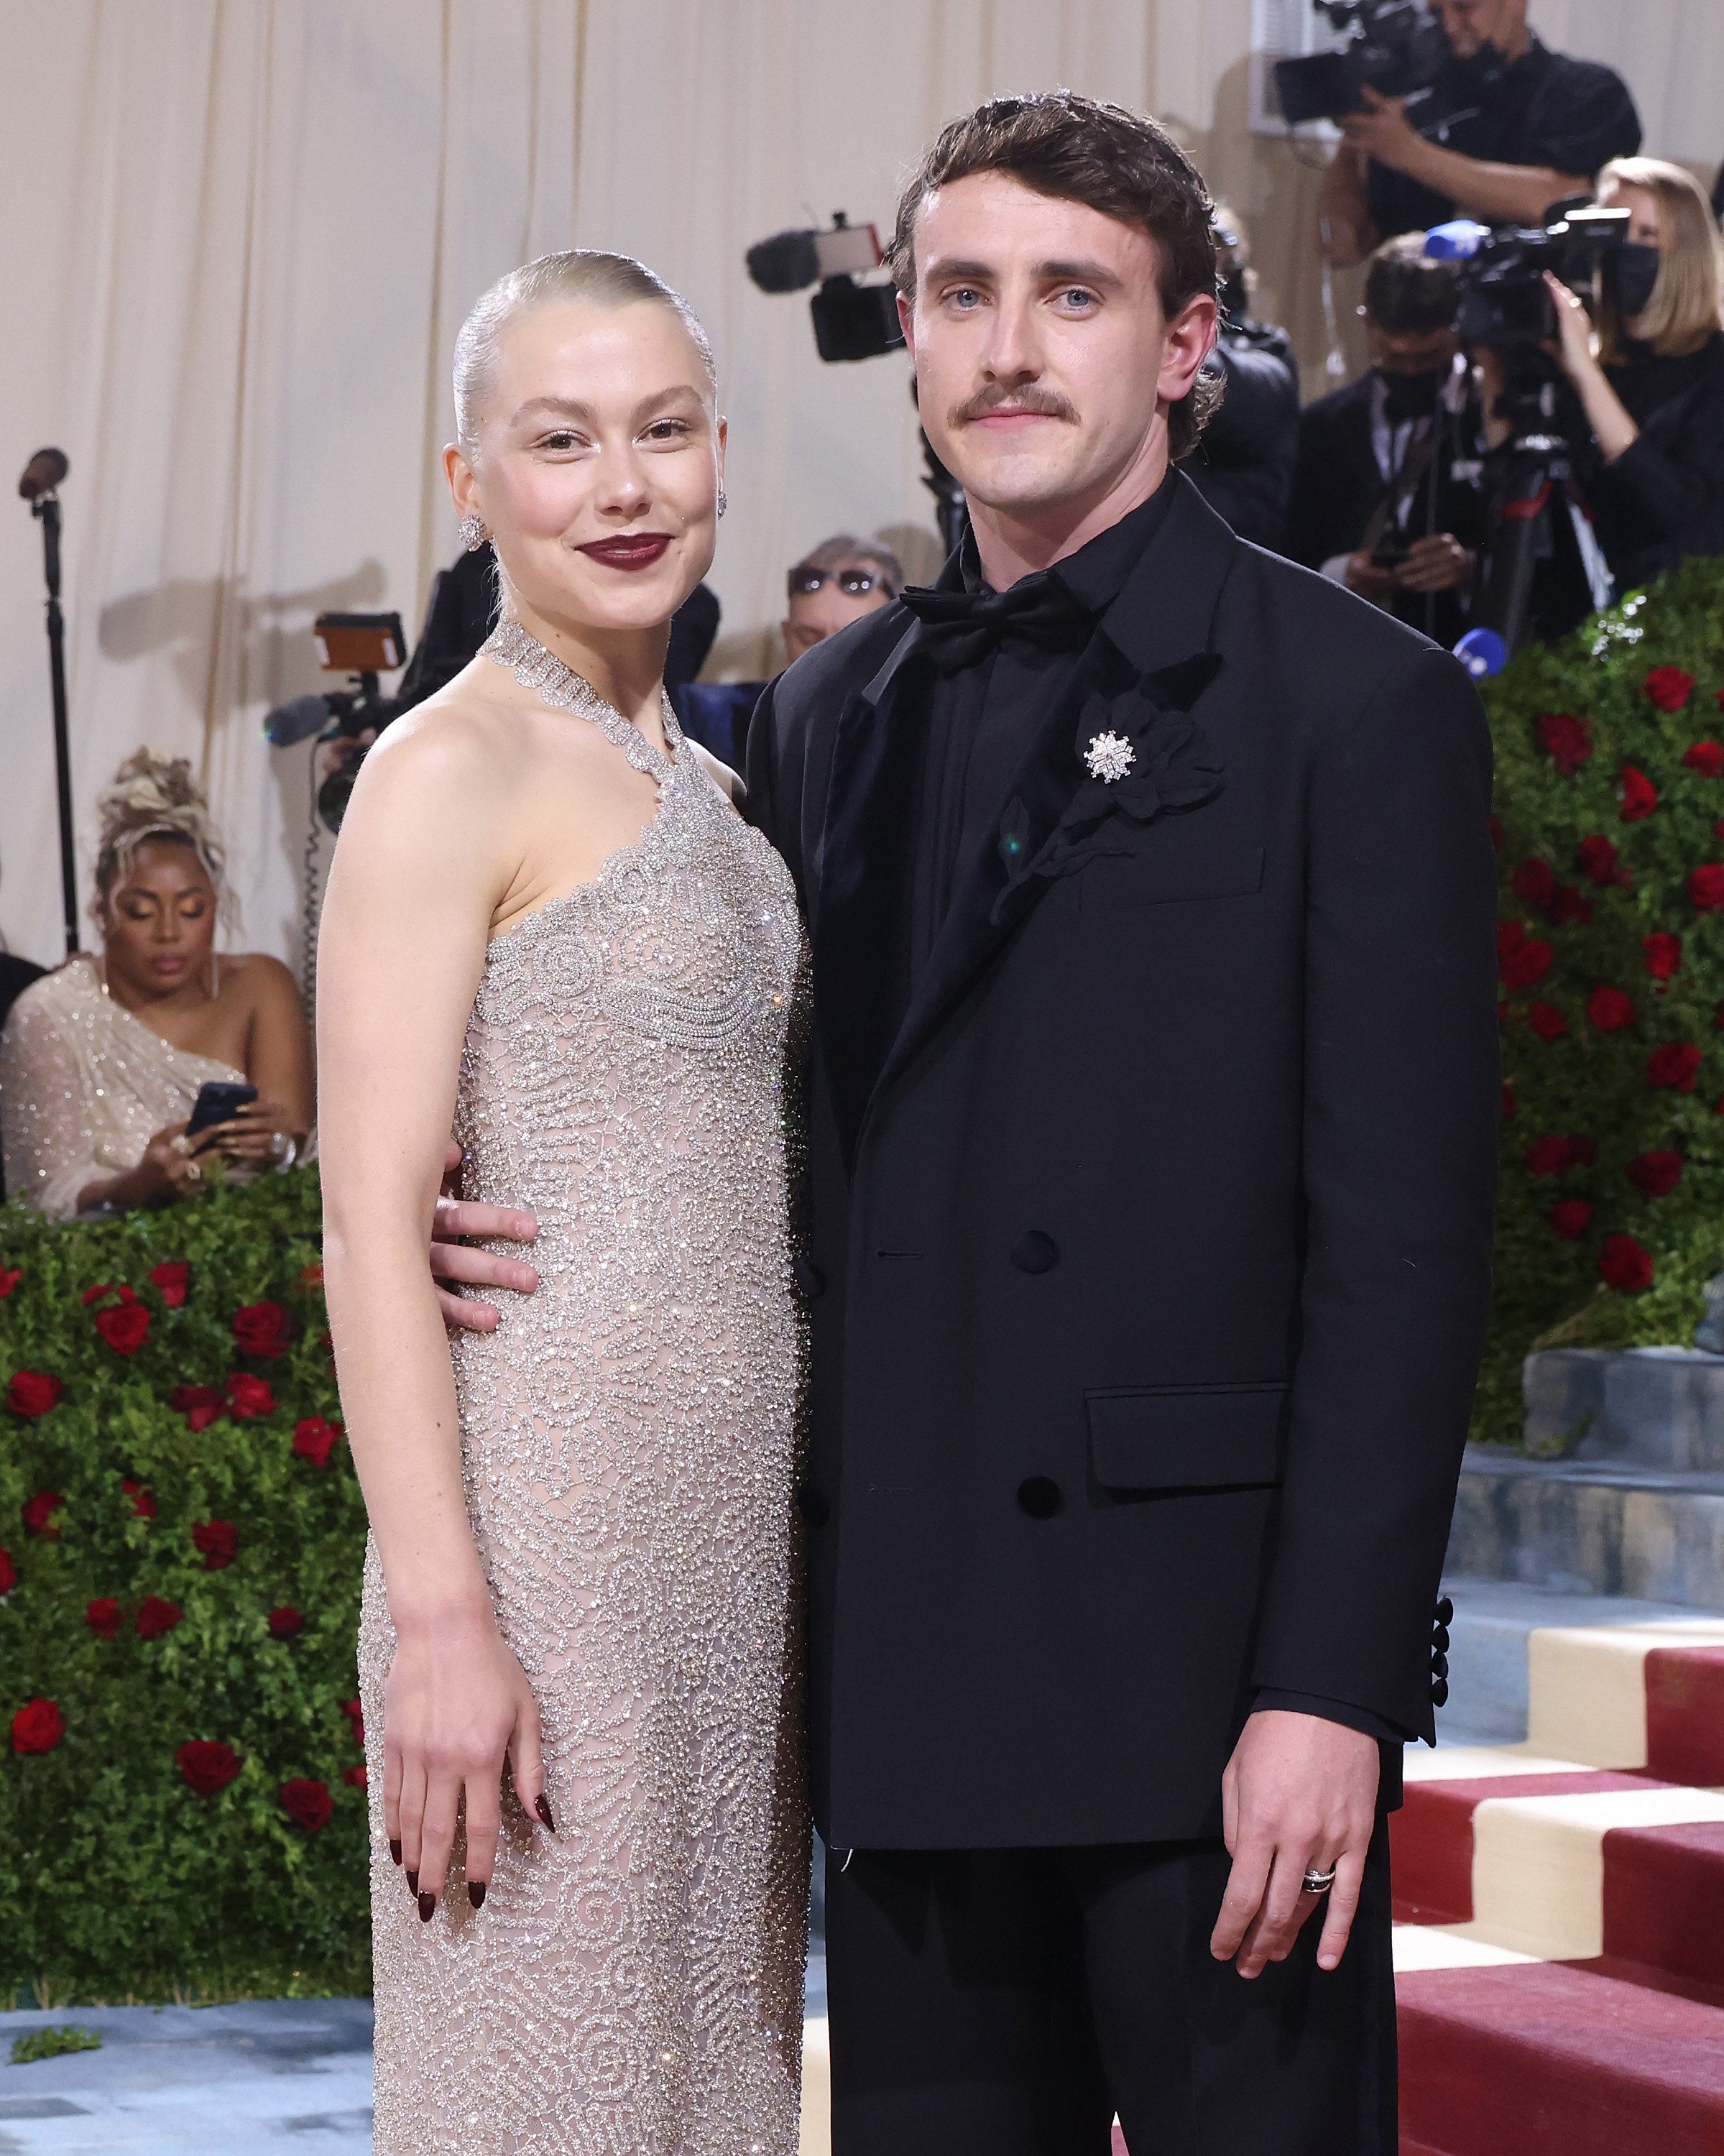 the couple at the Met Gala